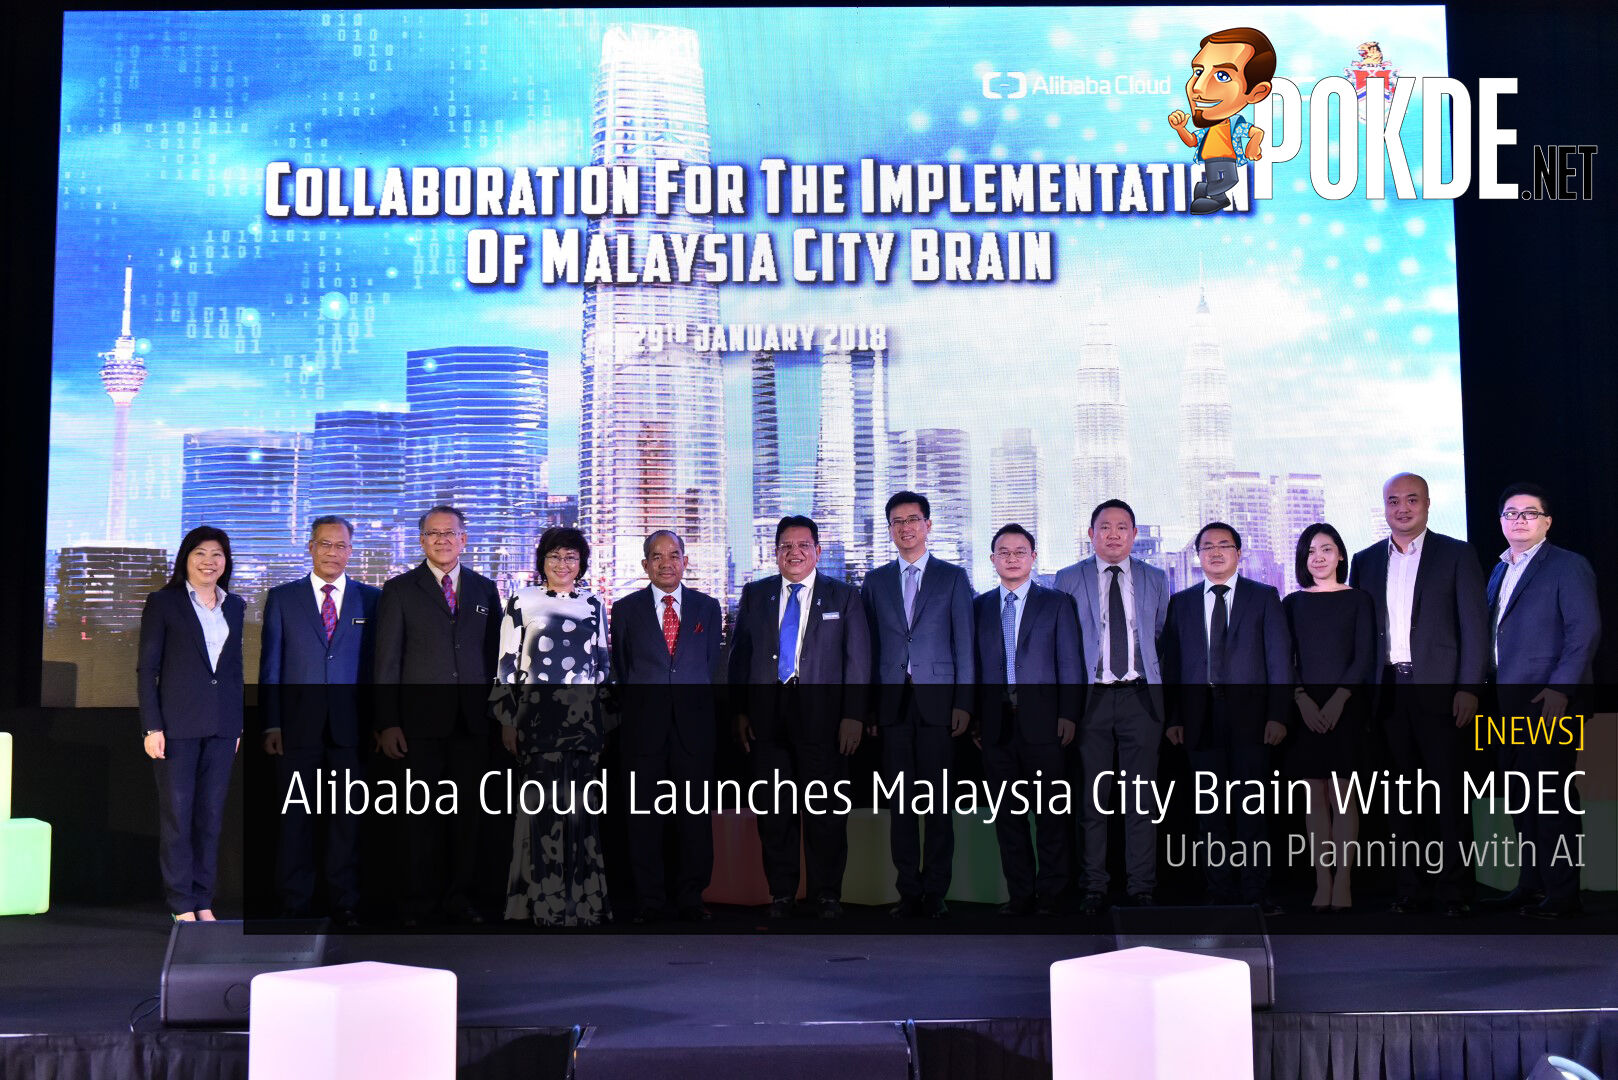 Alibaba Cloud Launches Malaysia City Brain With MDEC - Urban Planning with AI 31